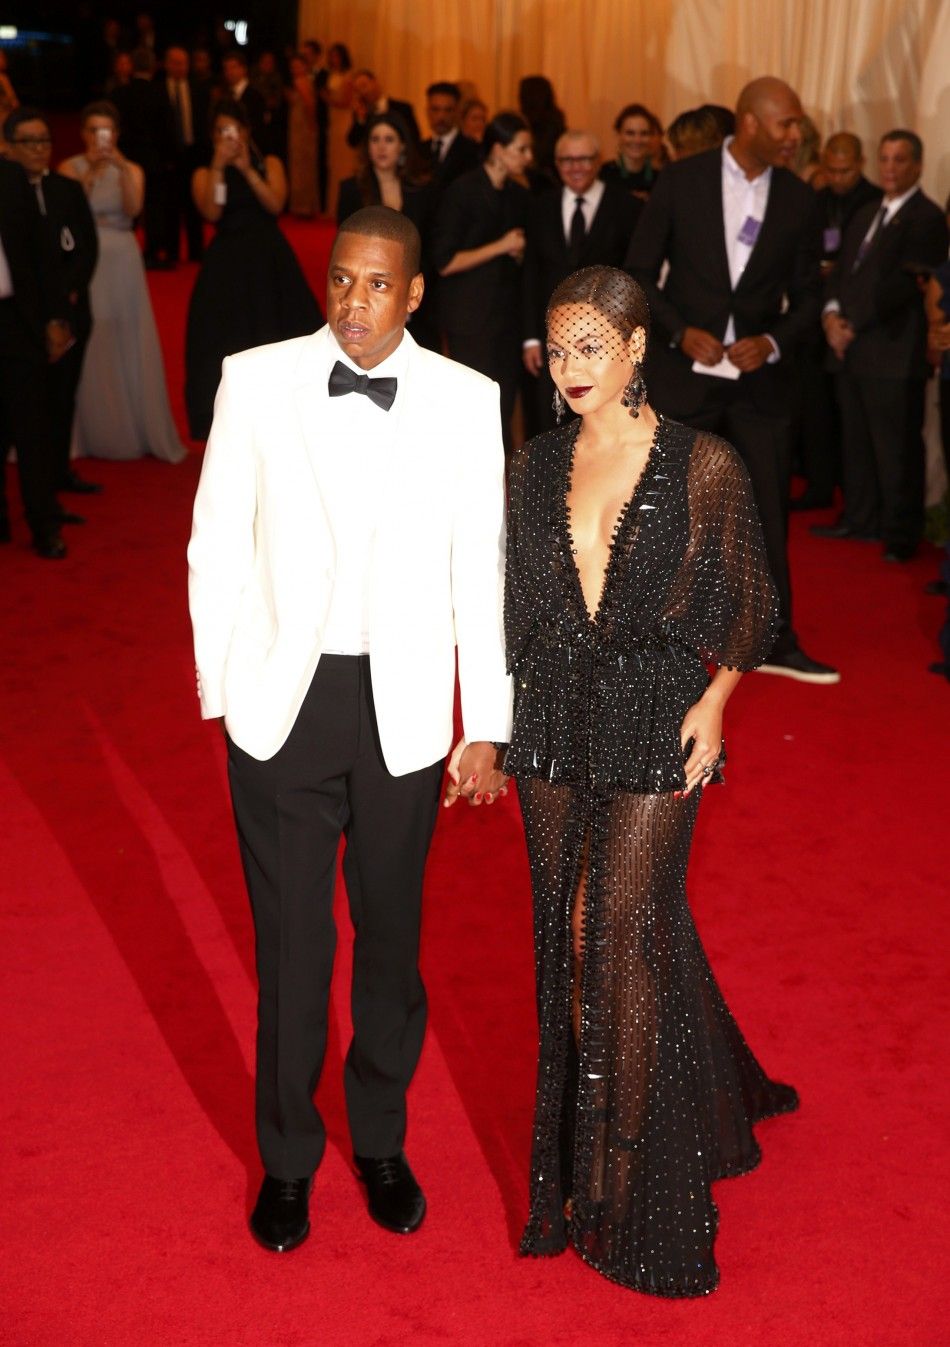 Jay Z and Beyonce Knowles arrive at the Metropolitan Museum of Art Costume Institute Gala Benefit celebrating the opening of quotCharles James Beyond Fashionquot in Upper Manhattan, New York, May 5, 2014. 